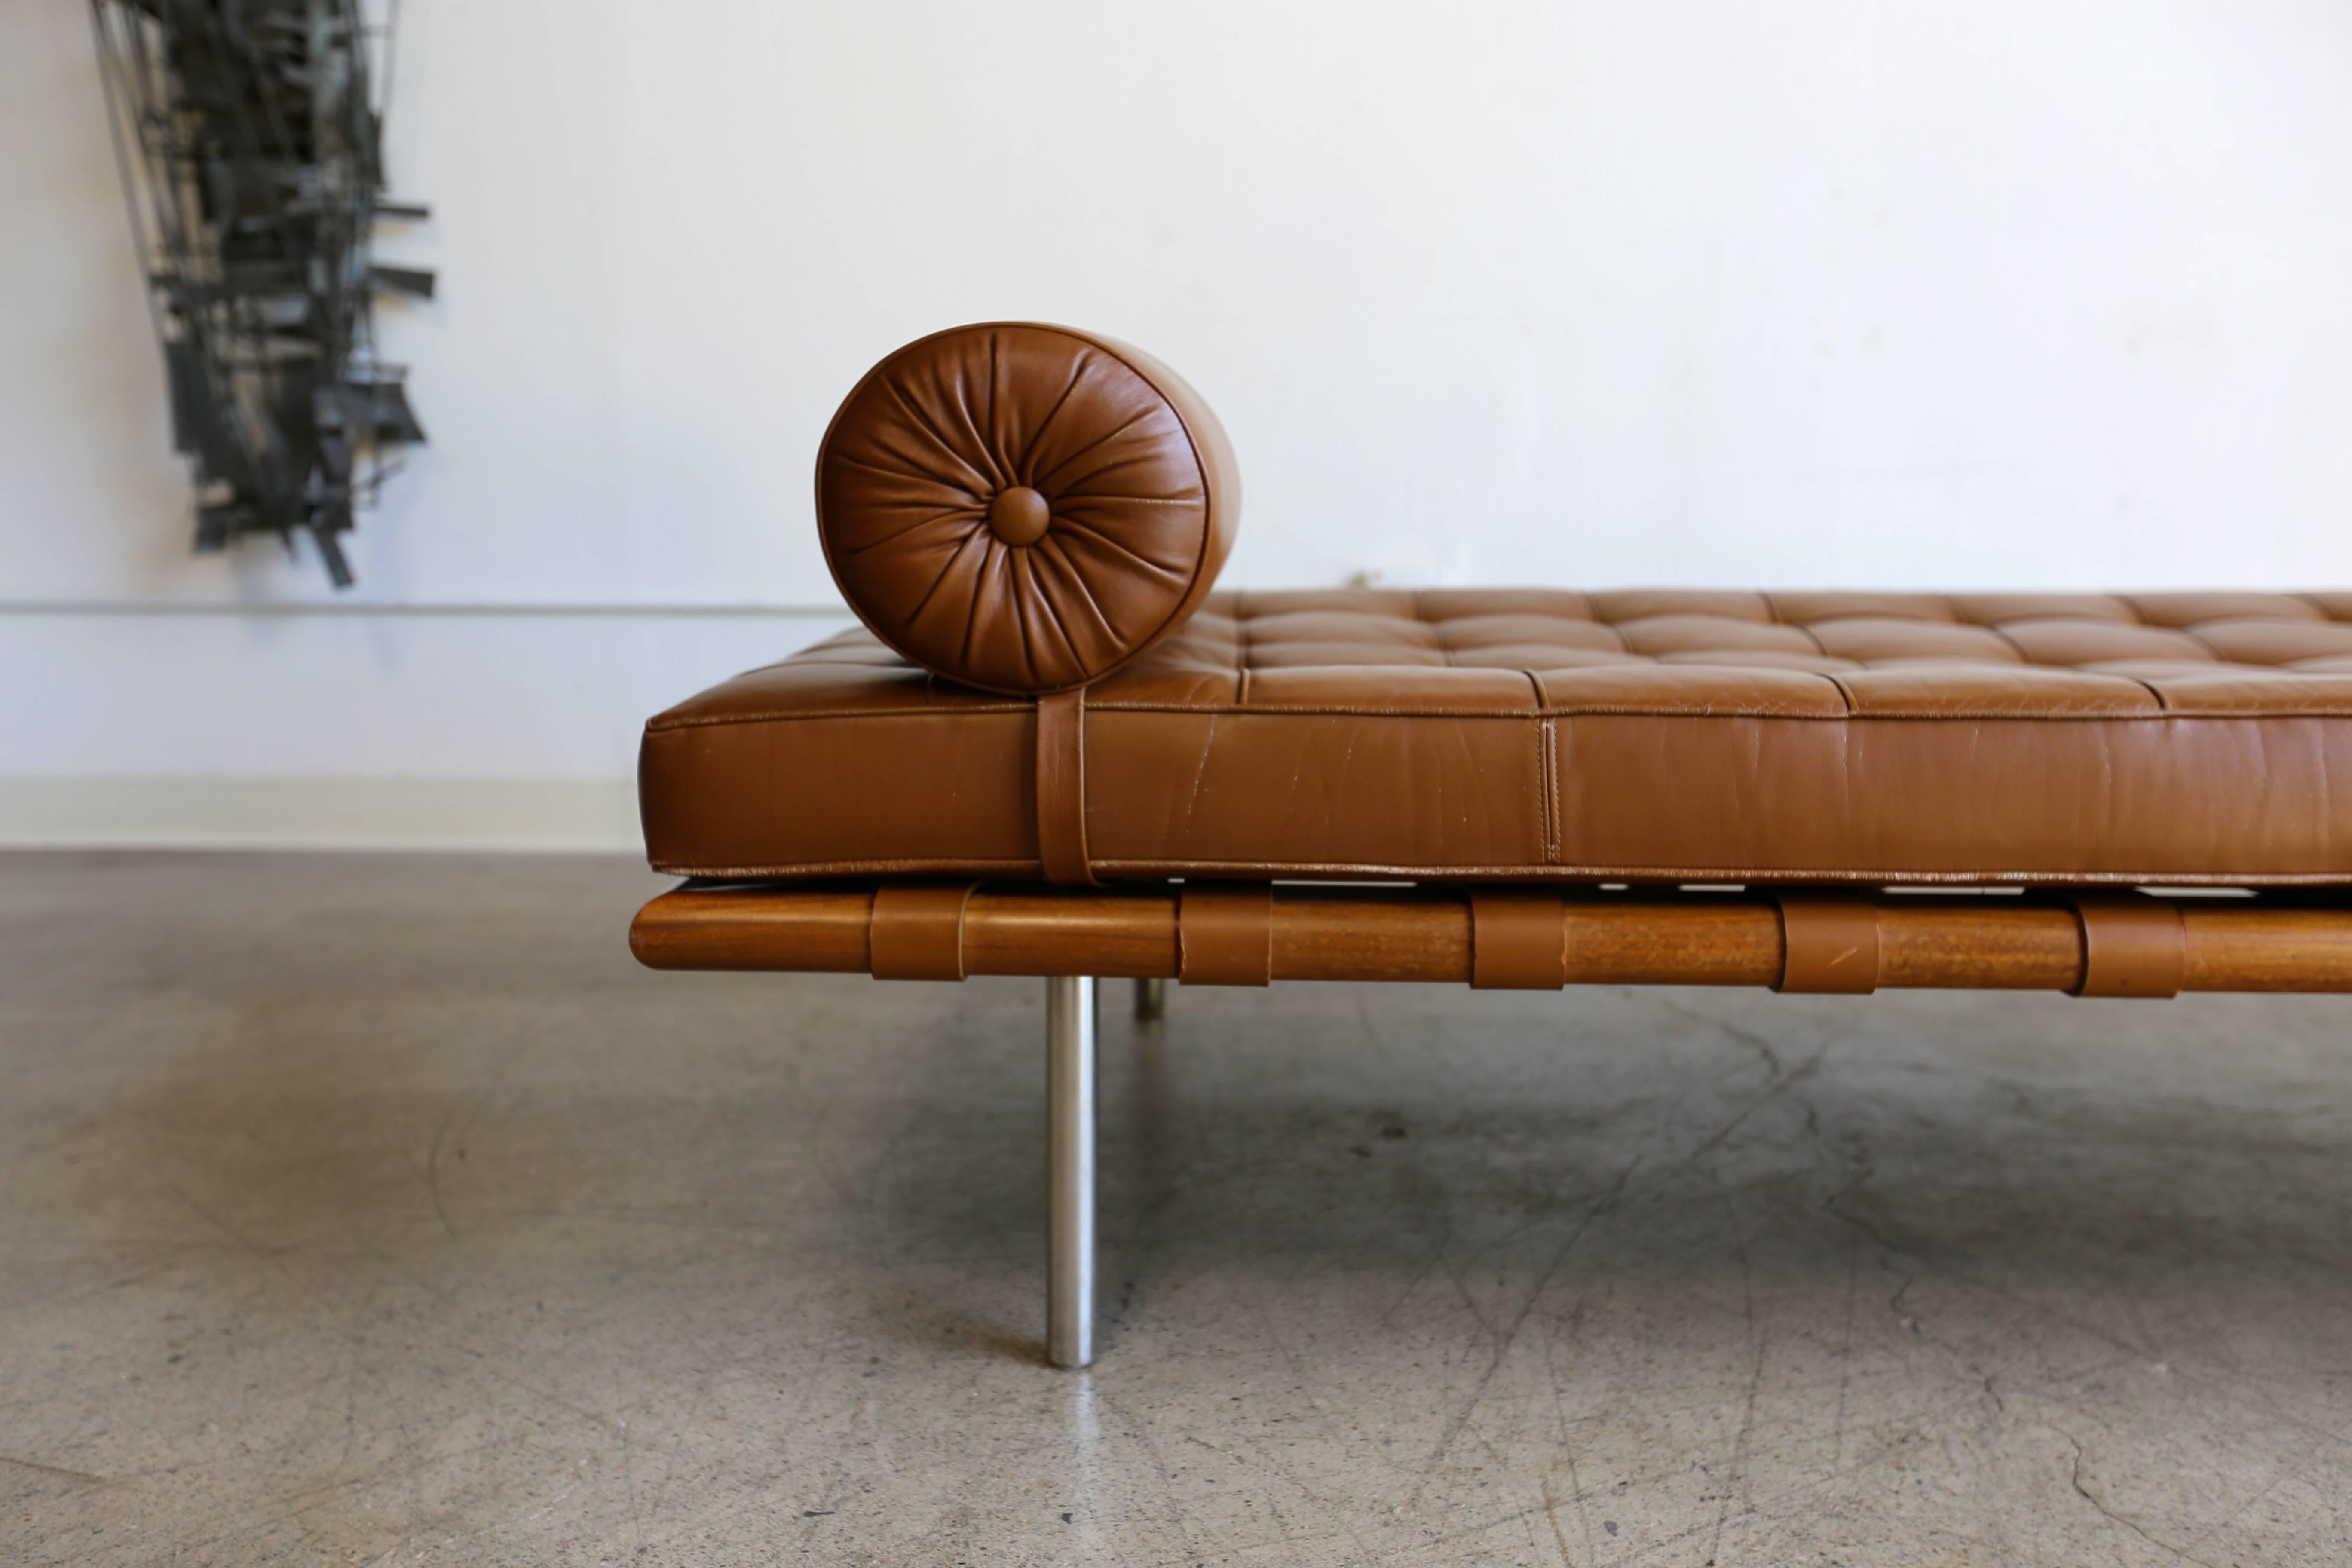 Rosewood and leather daybed by Ludwig Mies van der Rohe. This piece was produced by Knoll Associates.